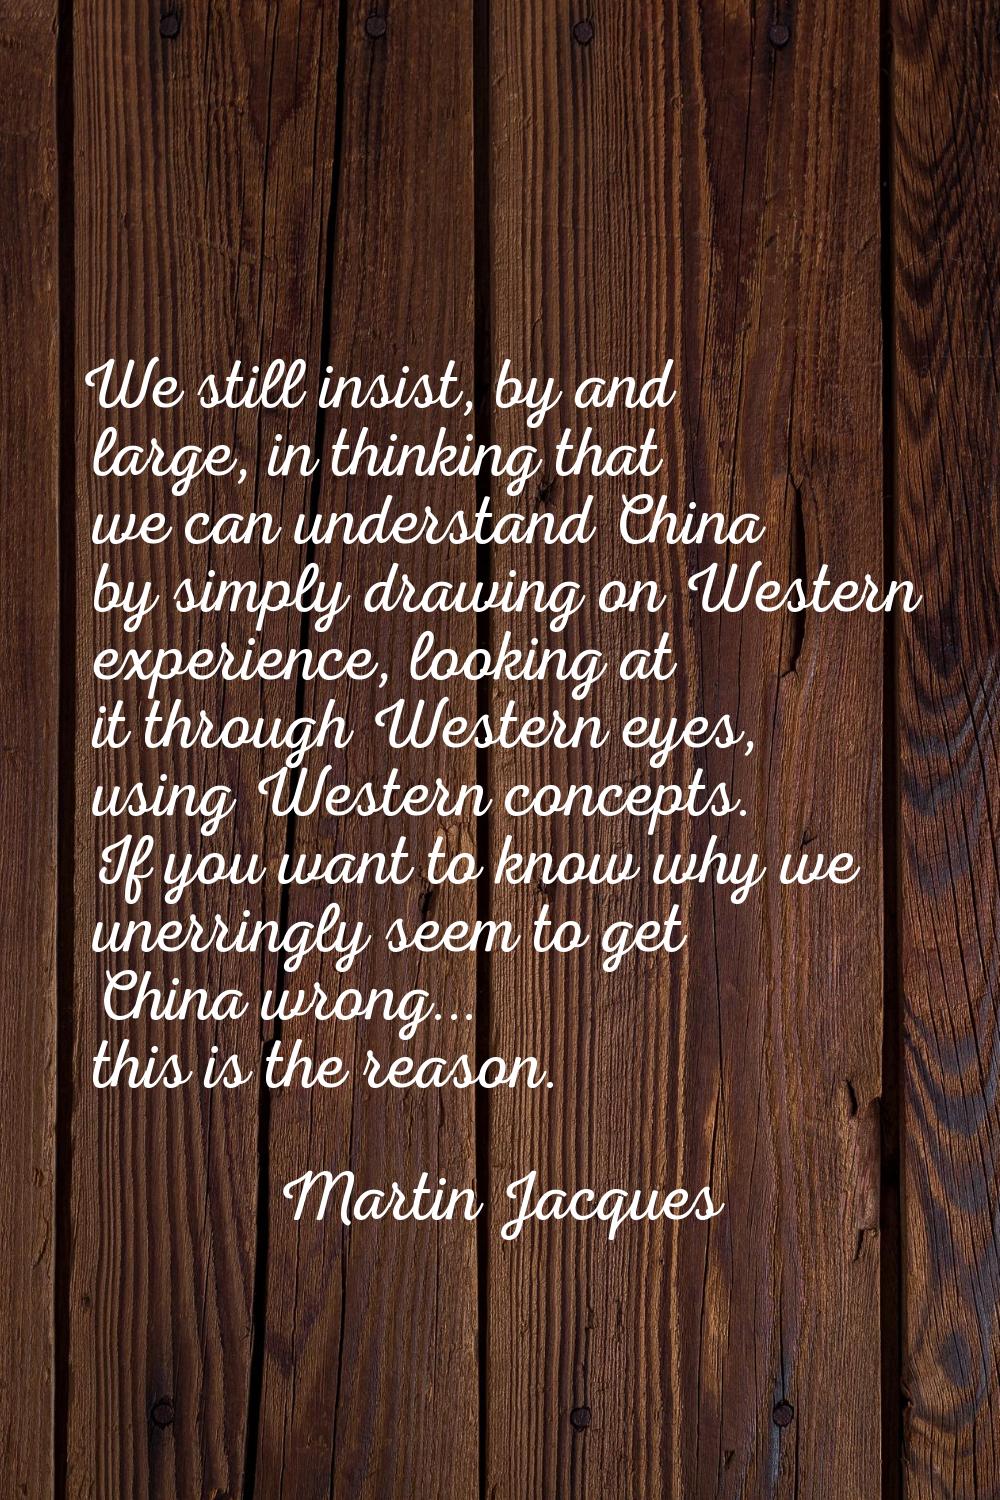 We still insist, by and large, in thinking that we can understand China by simply drawing on Wester